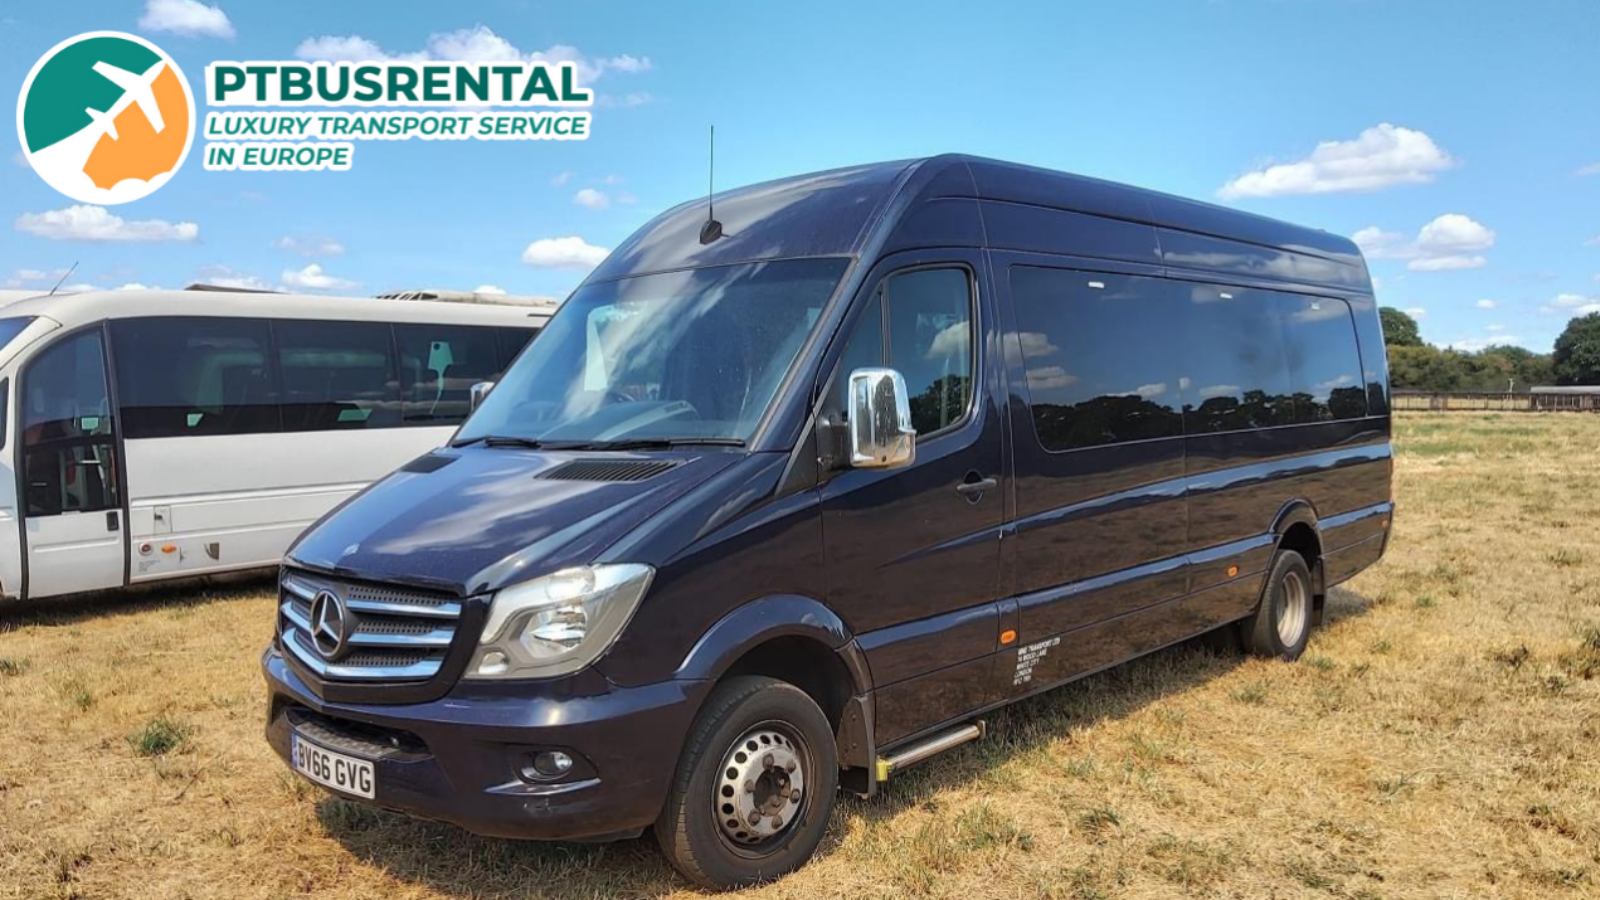 Join the bus rental in Budapest in 1 day with PTBusrental